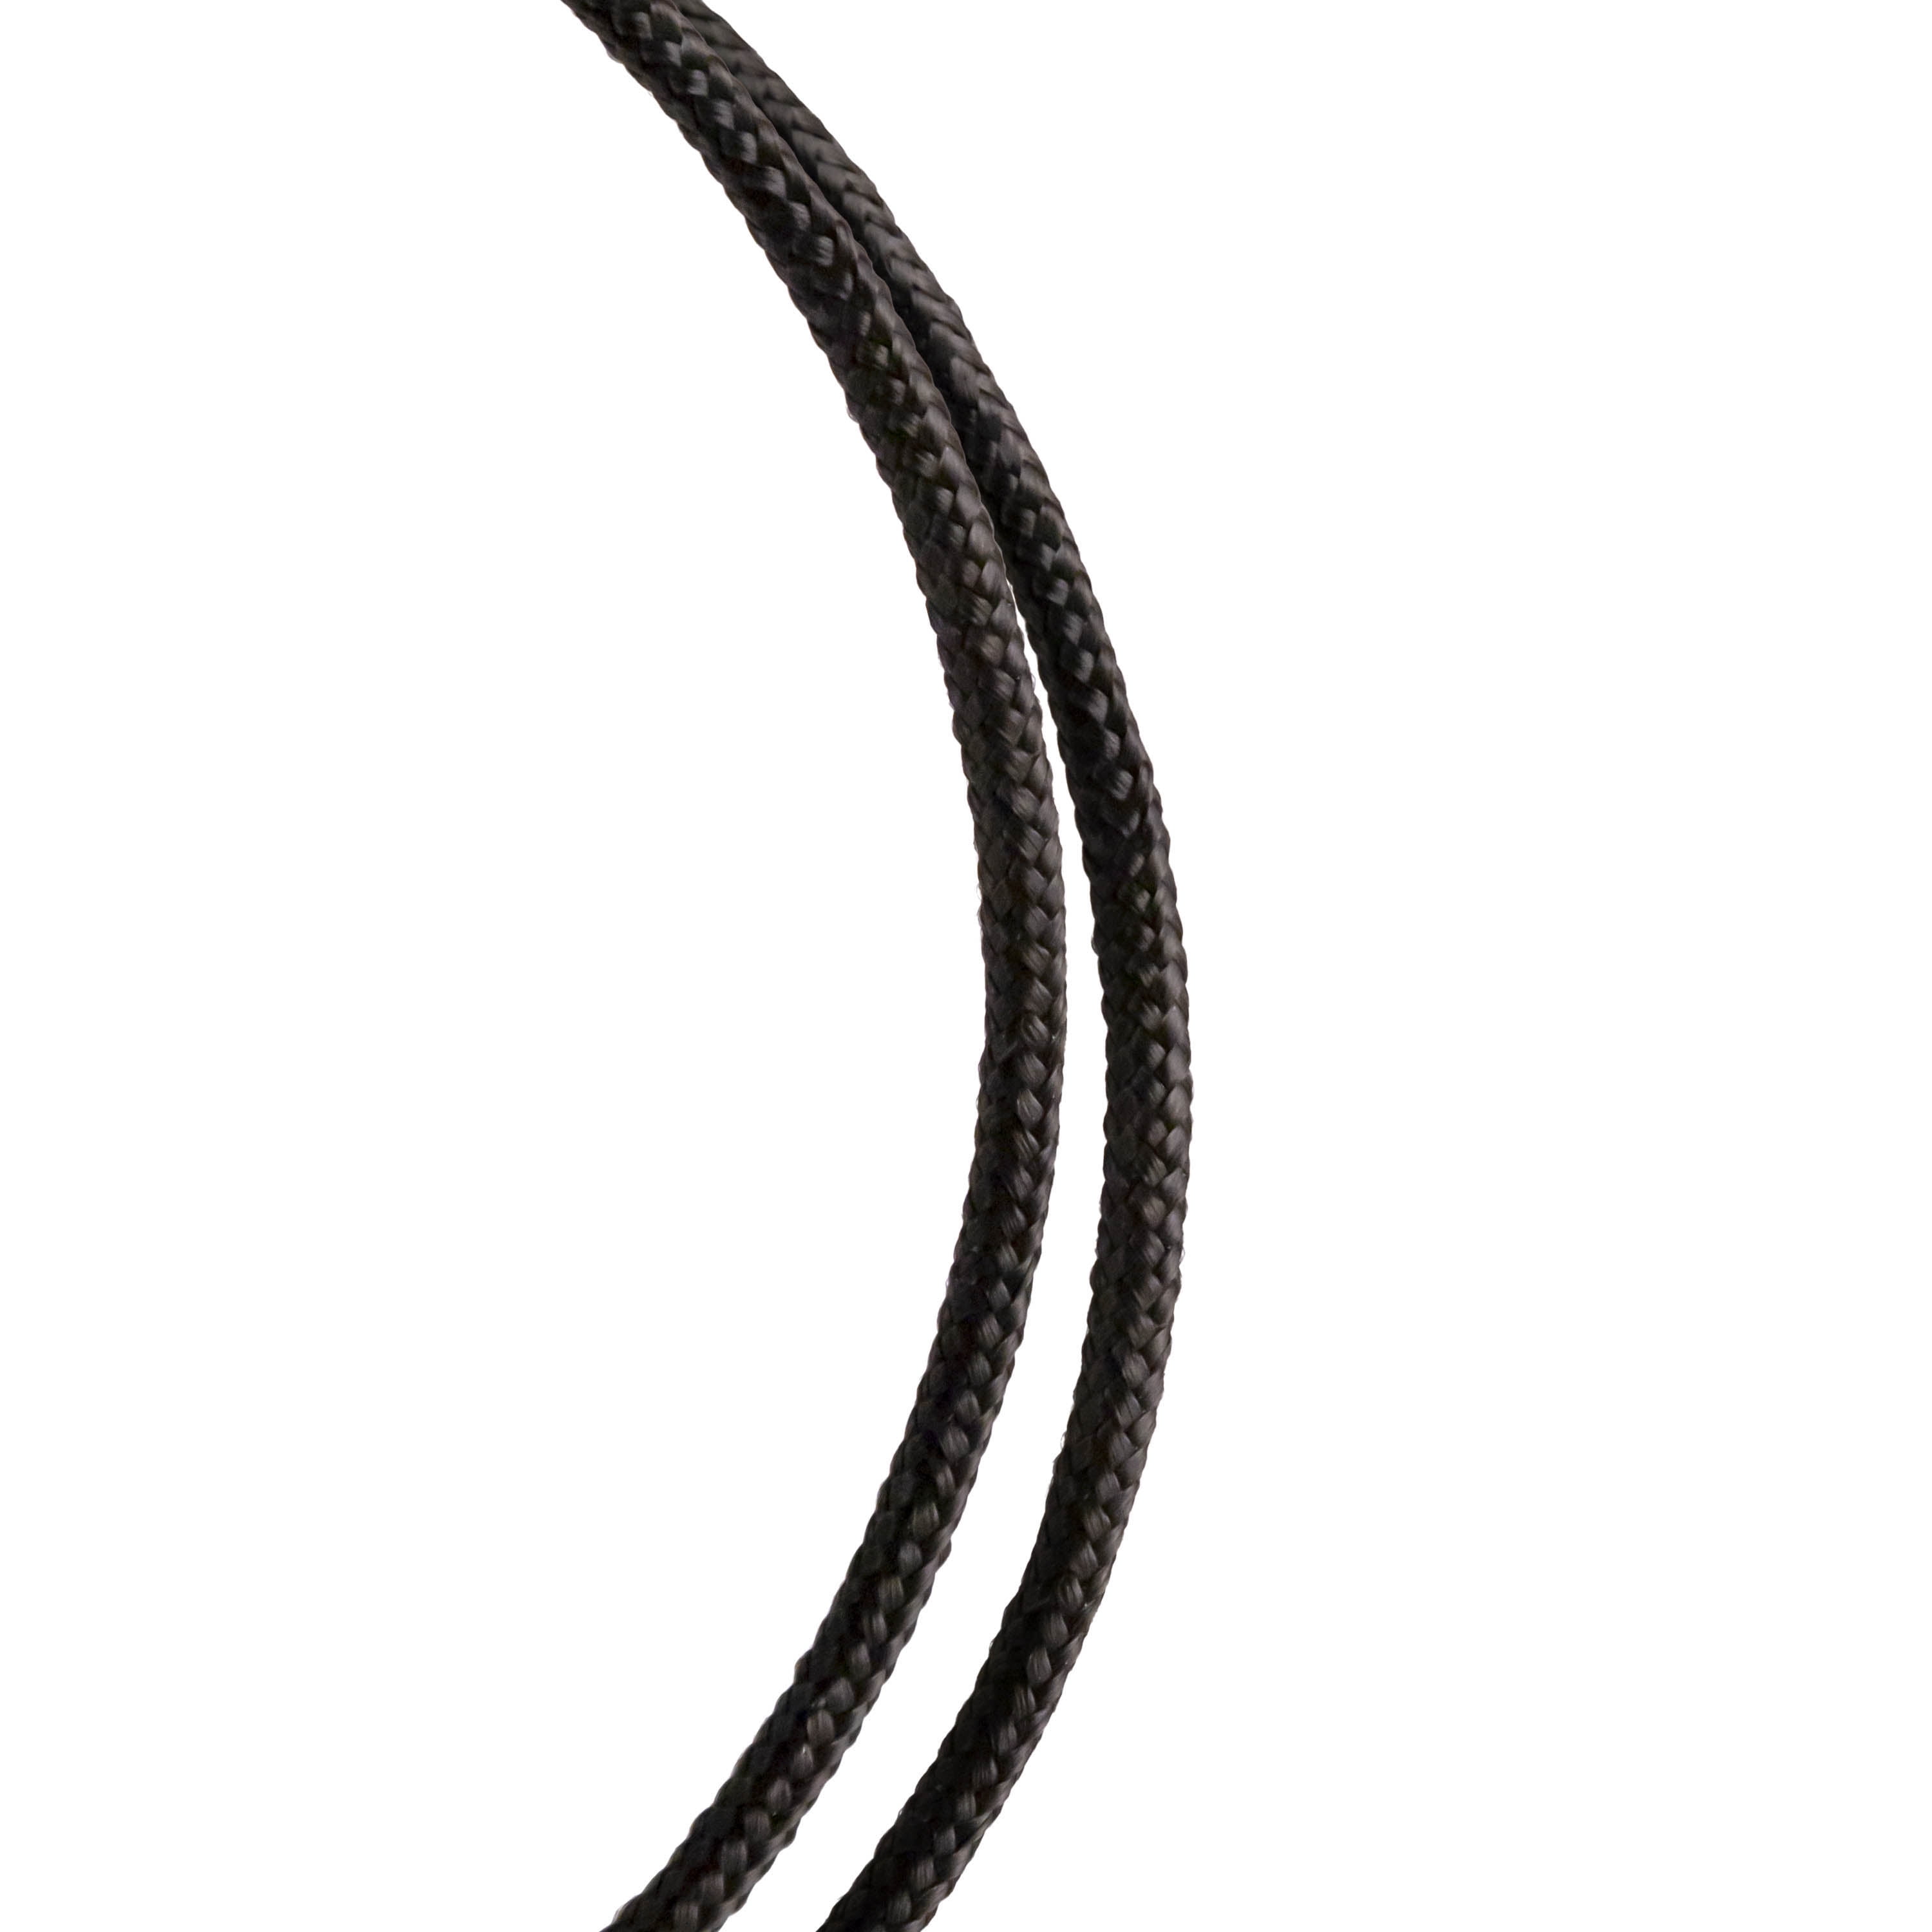 Polypro Soft 1 inch MFP Hollow Flat Braid Rope - Multiple Colors and Lengths - Easy to Splice and Seal, Size: 25 Feet, Black